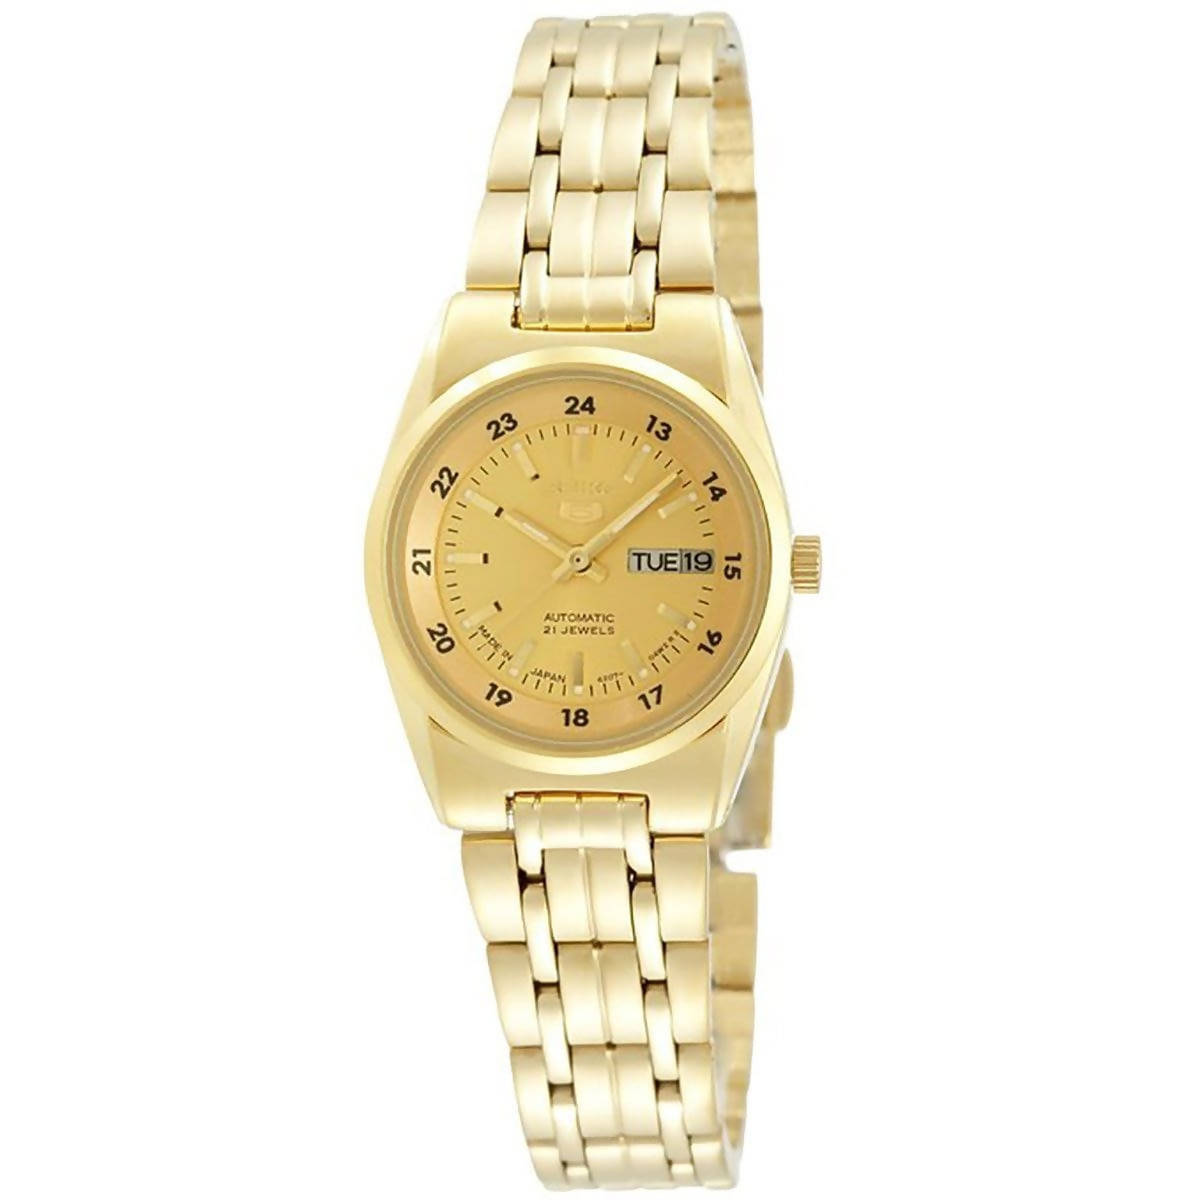 Seiko Women's Mechanical Watch Analog, Gold Dial Gold Stainless Band, SYMC04J